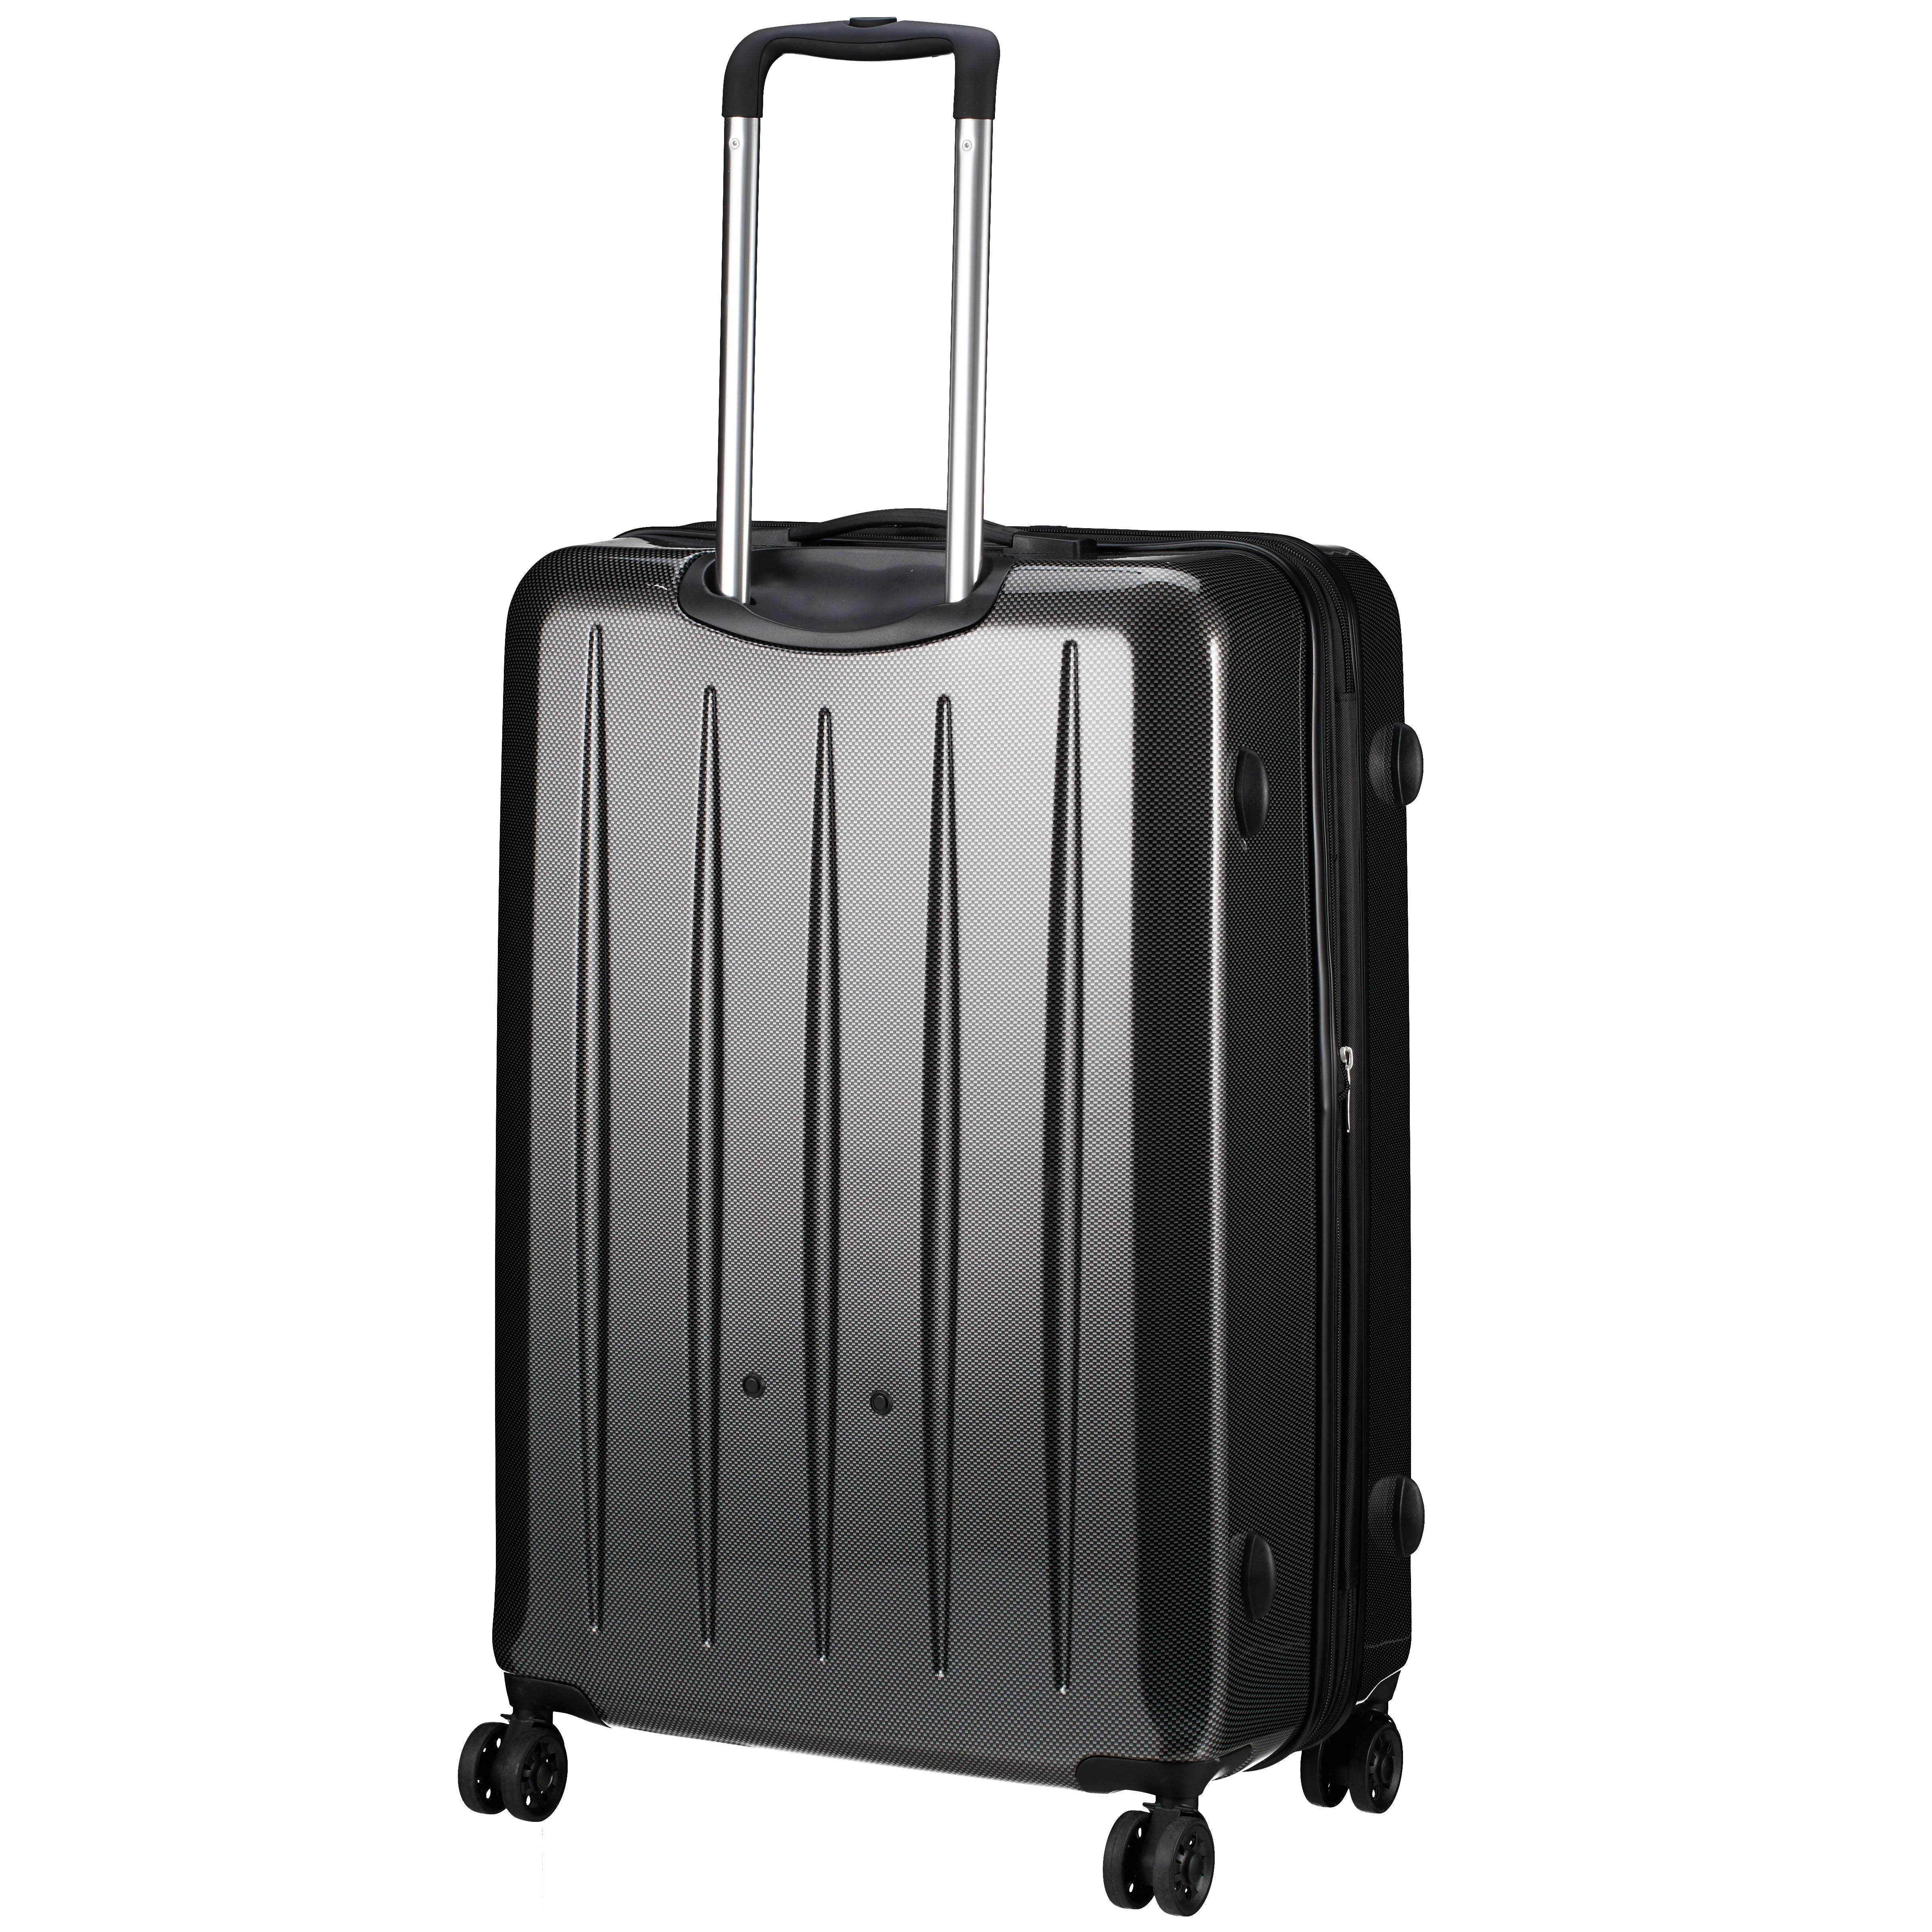 Check In London 2.0 trolley 4 roues 75 cm - rose